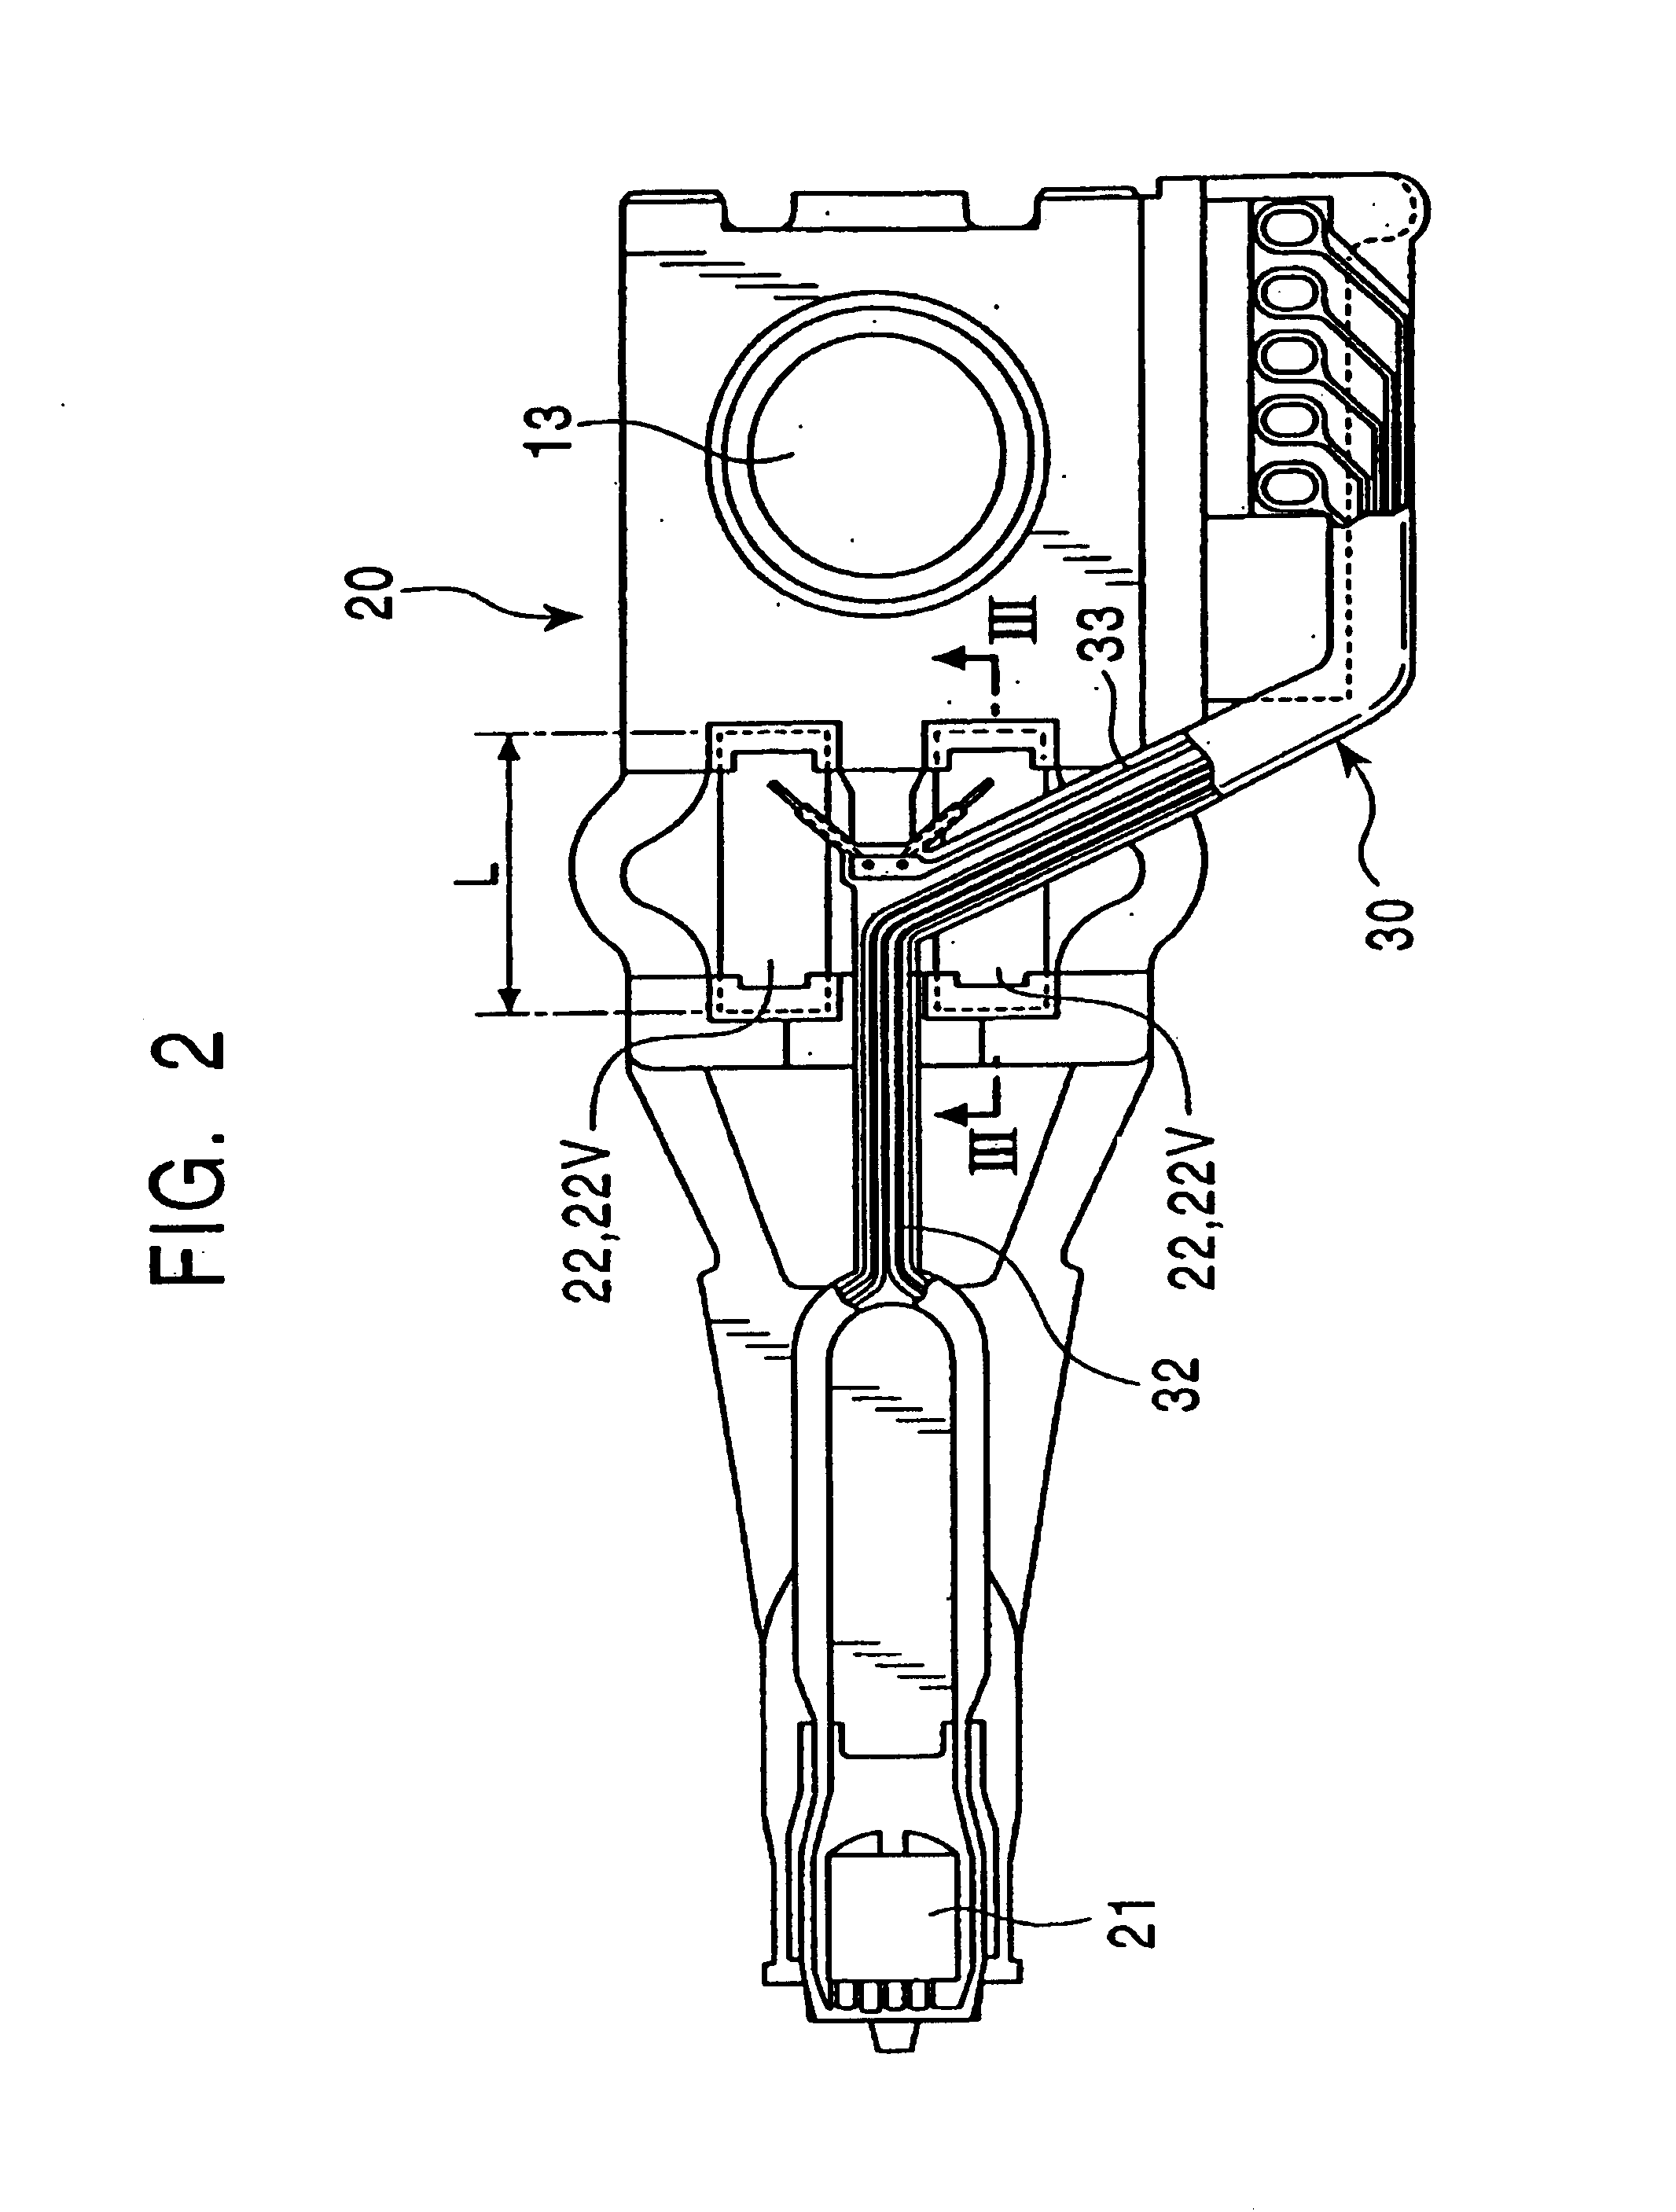 Magnetic head actuator having finely movable tracking device